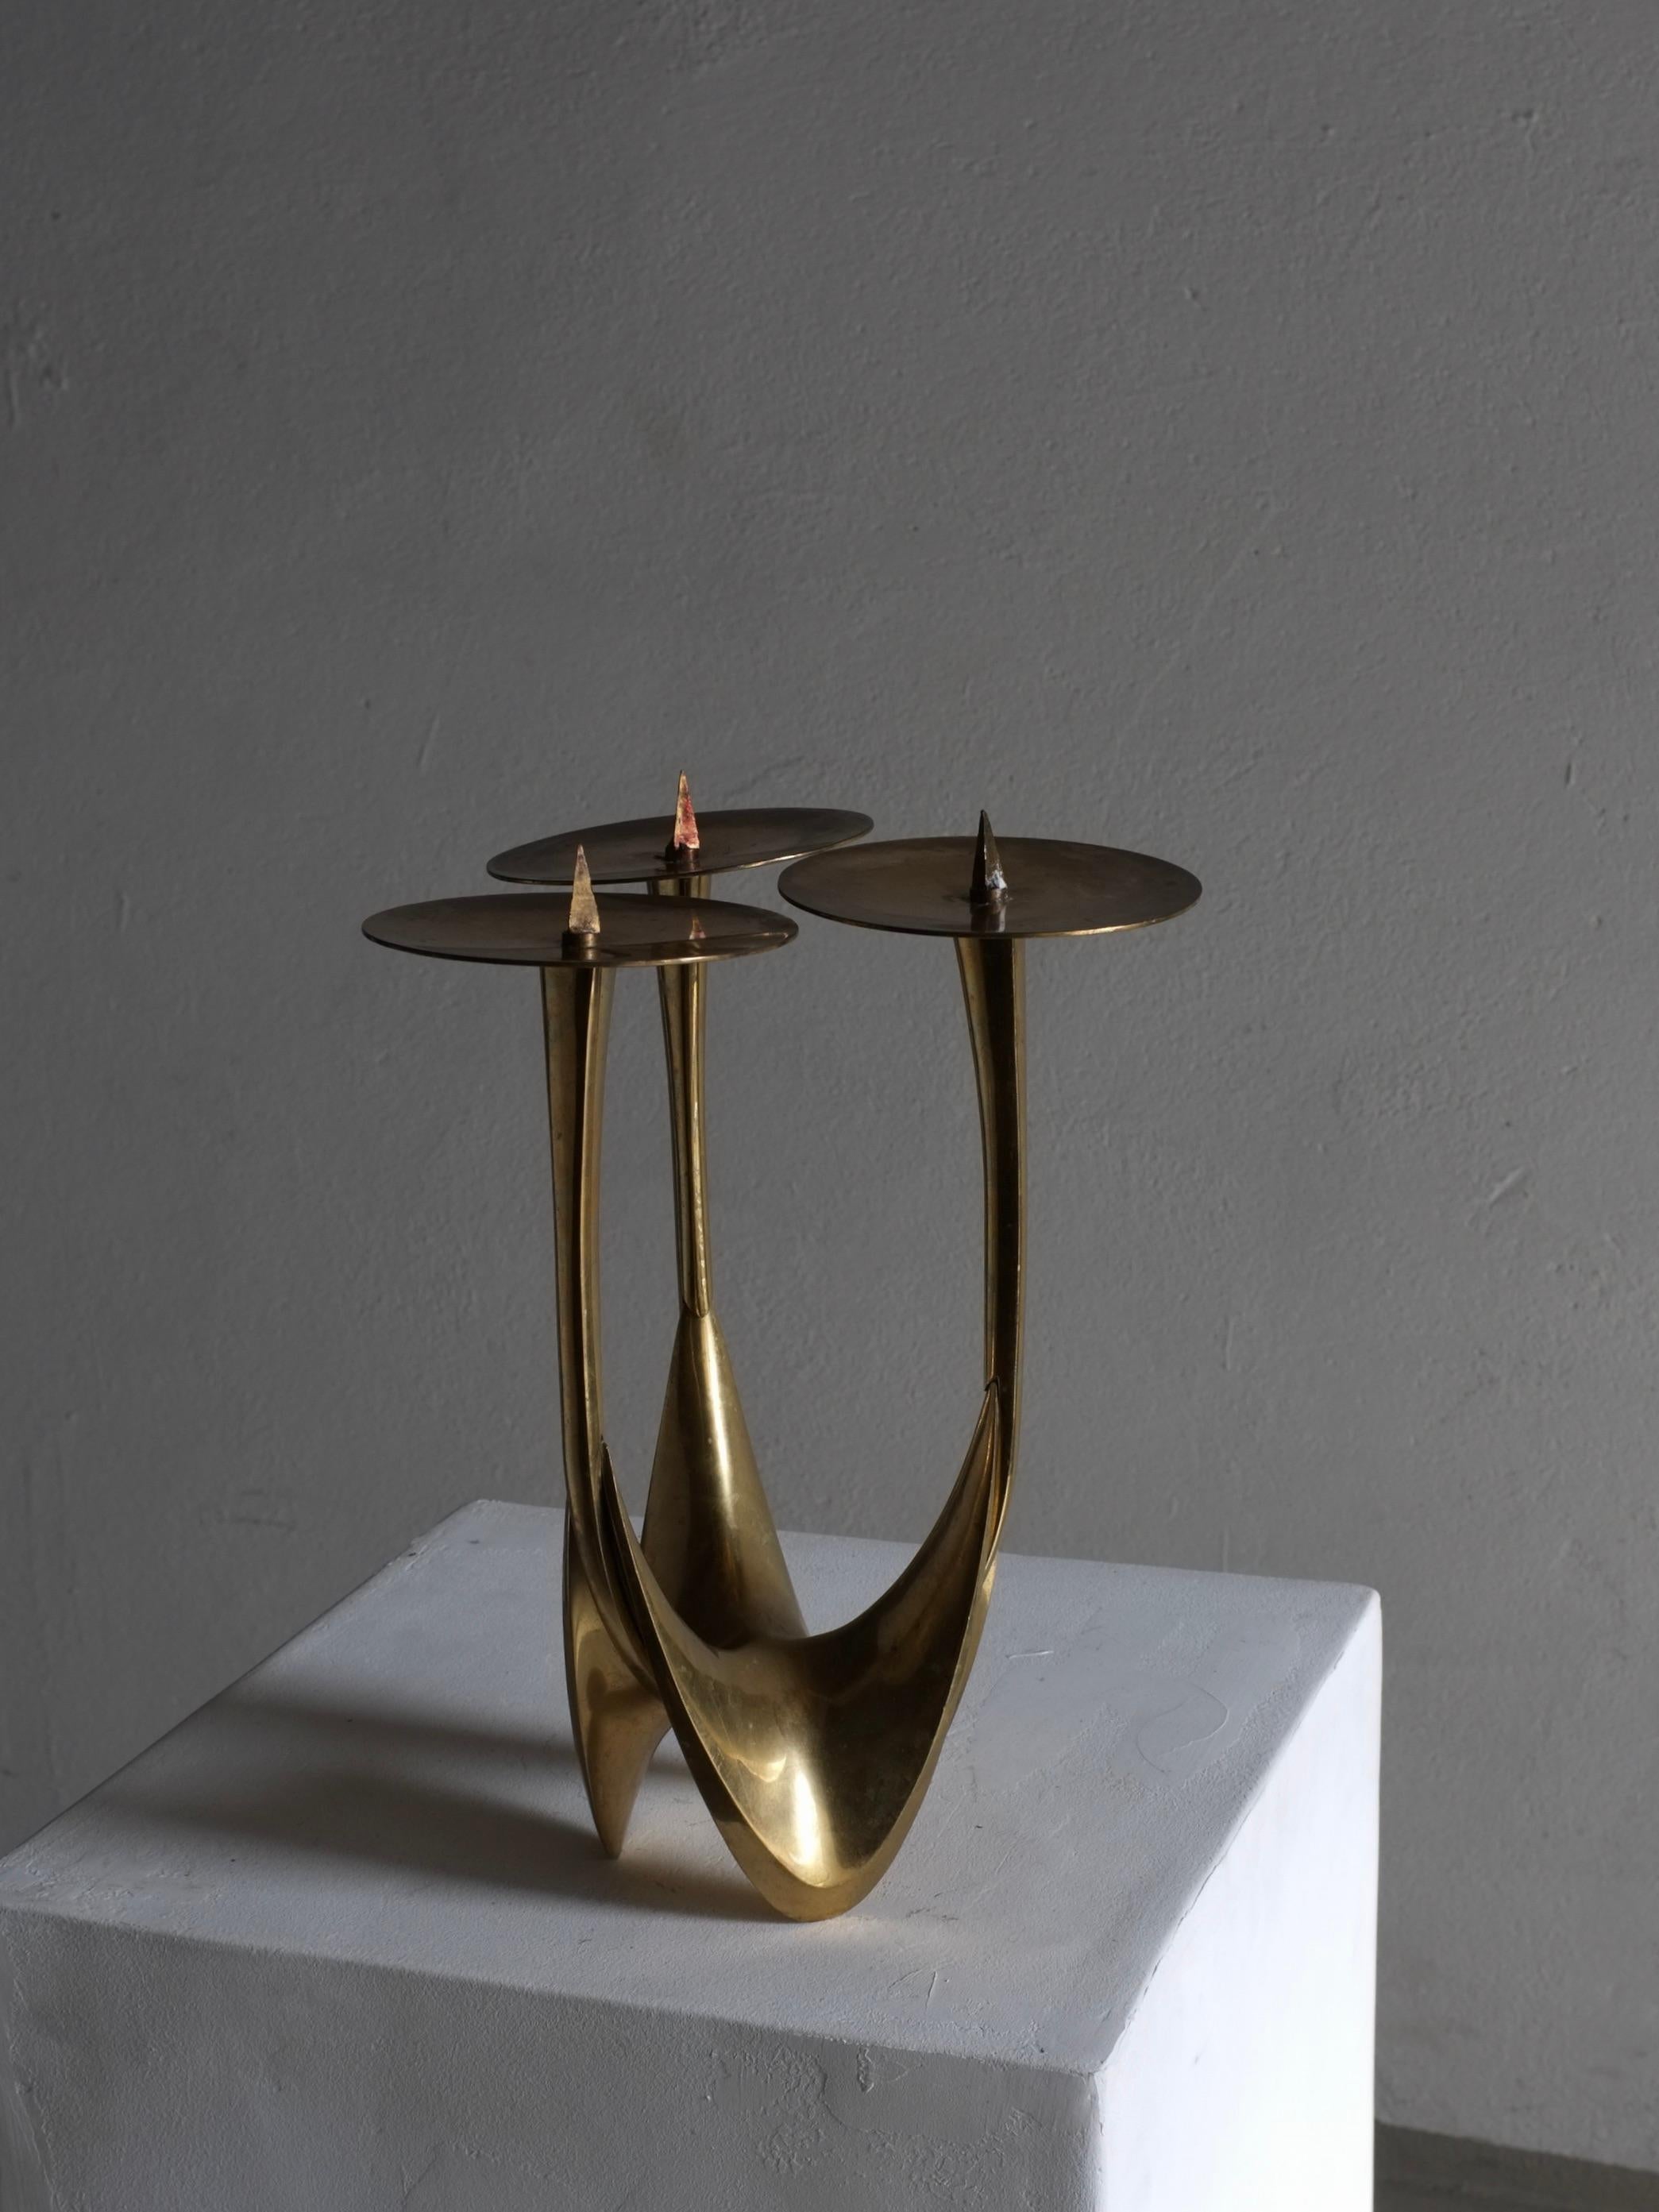 Vintage brutalist brass metal candle holder with three arms designed by Klaus Ullrich for Faber and Schumacher. Heavy item.

Additional information:
Country of manufacture: Germany
Period: 1950s
Dimensions: D 20 cm, Cup Diameter 10.5 cm x H 26